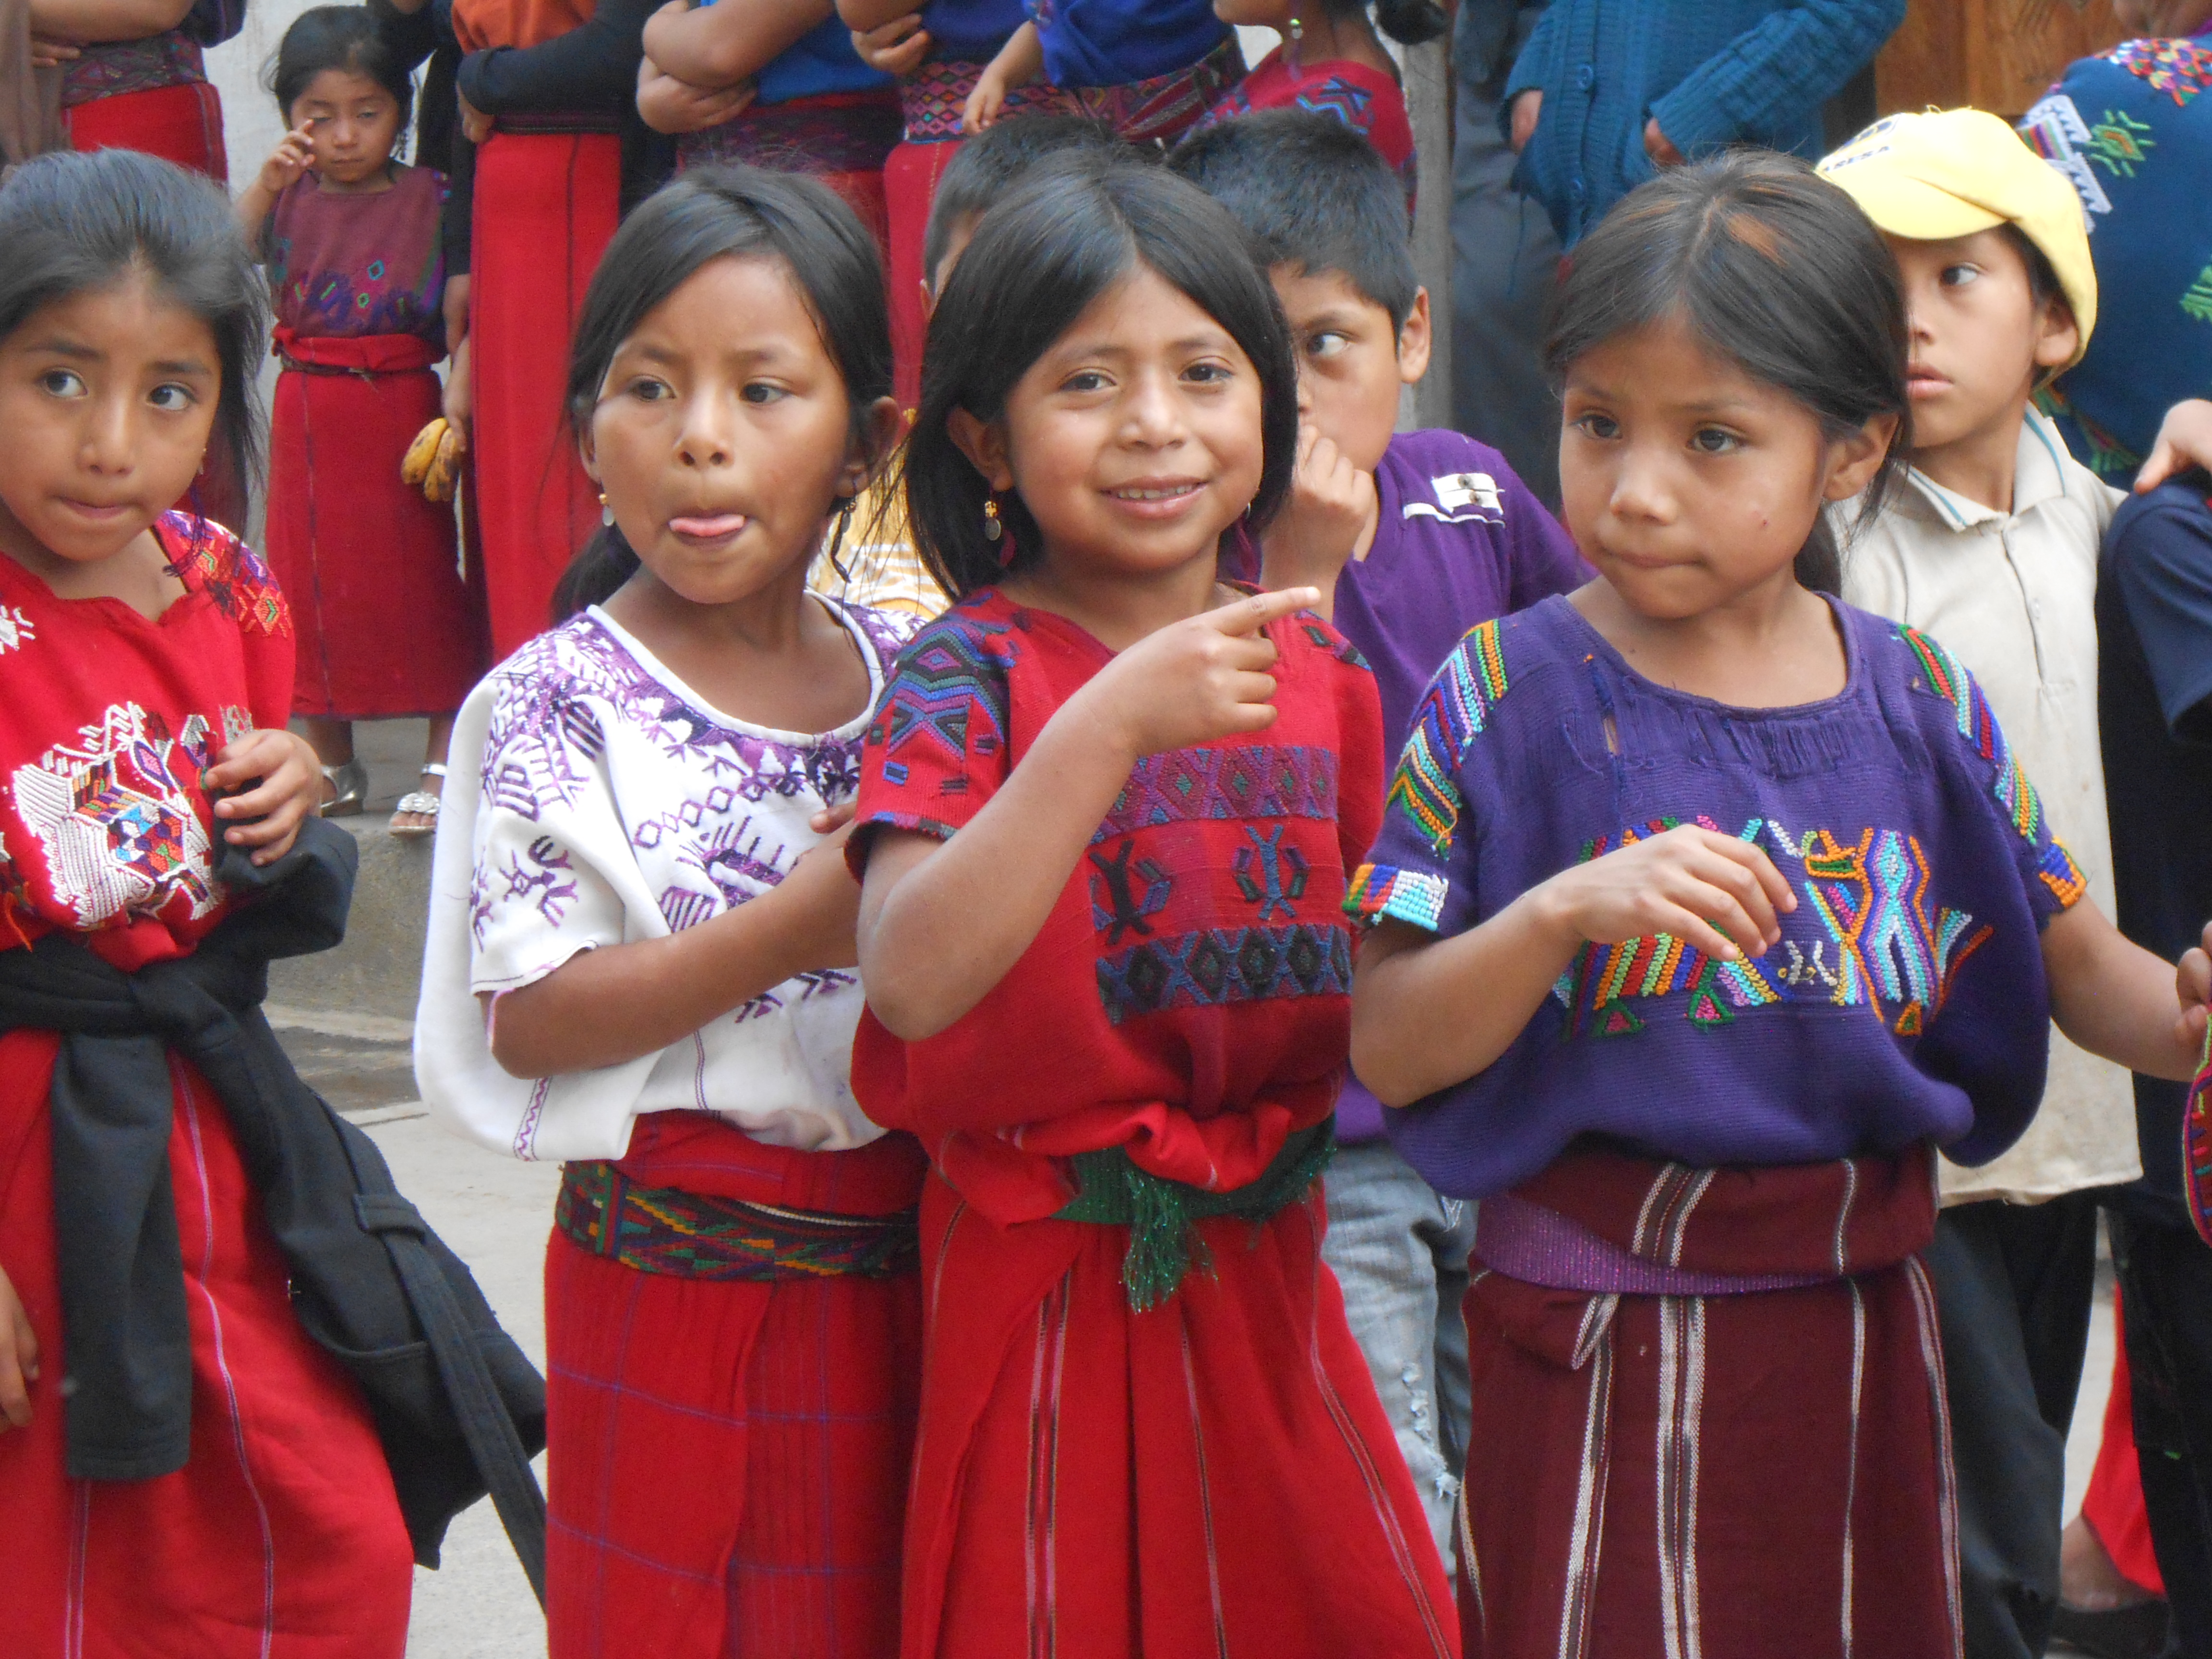 Chia and Maya: Potential For a Nutritional Renewal In Guatemala